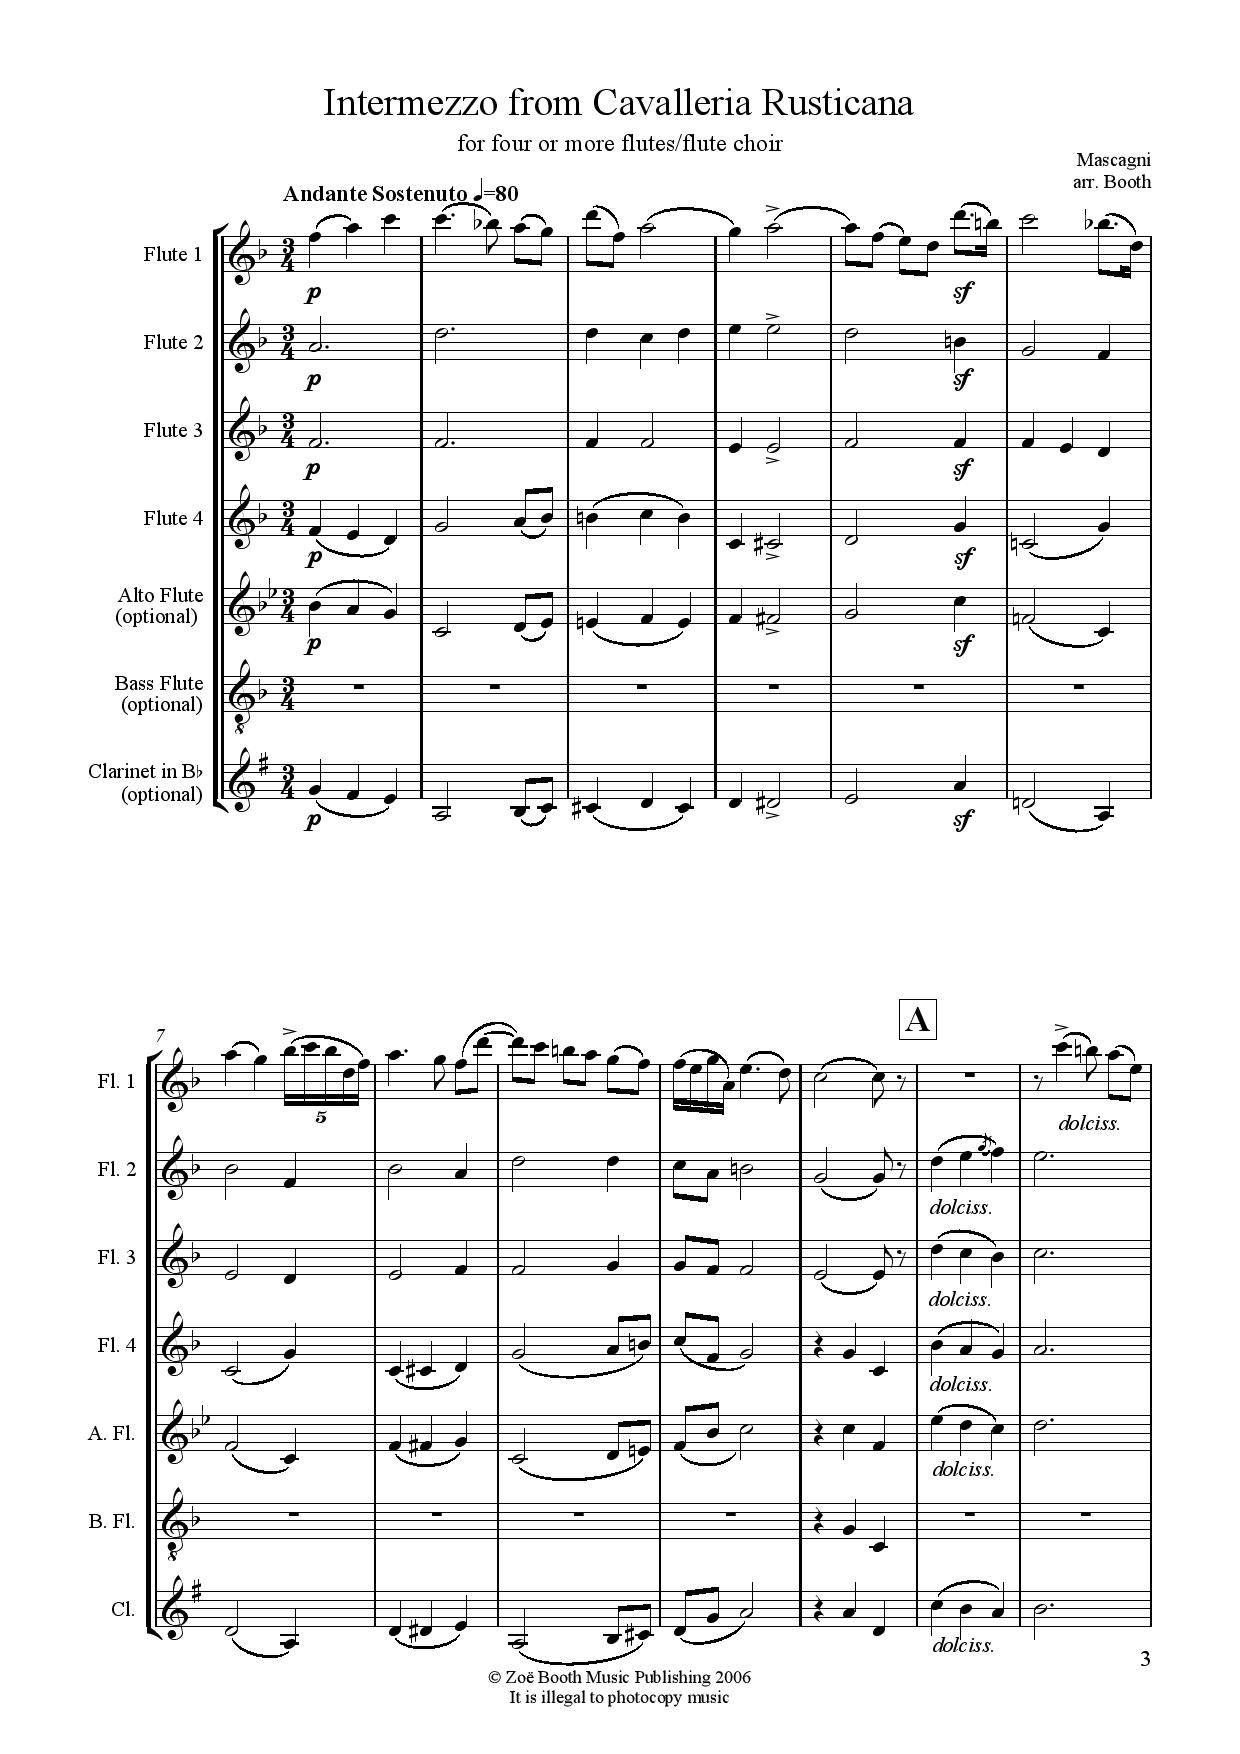 Intermezzo by Mascagni,  arranged by Zoë Booth for four or more flutes/flute choir